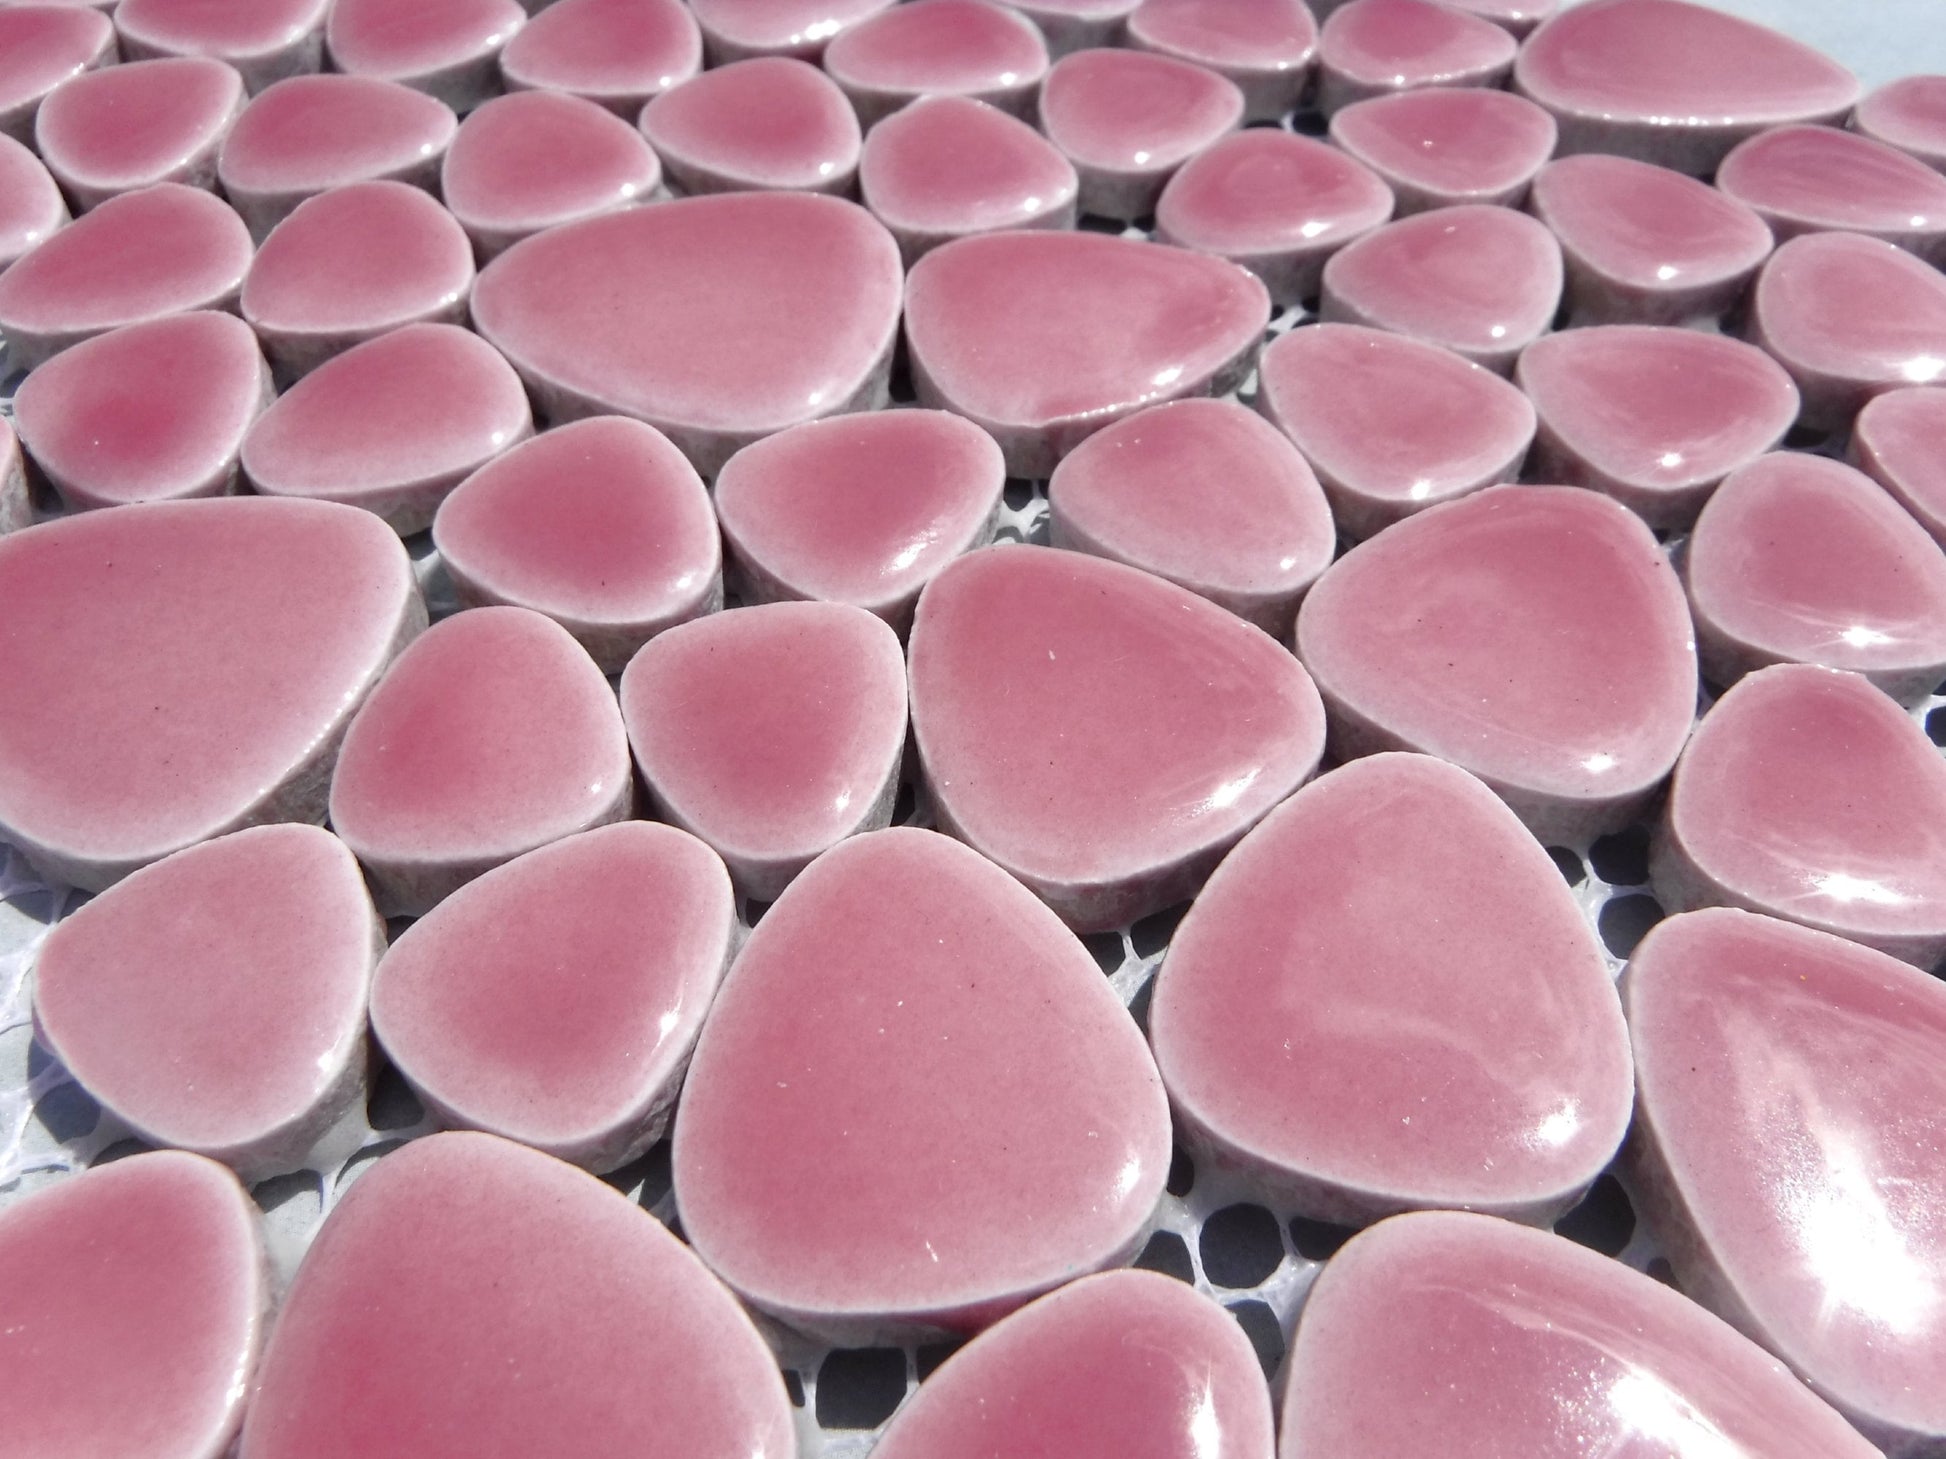 Pink Pebble Mosaic Tiles - Half Pound Ceramic Tiles in Assorted Sizes